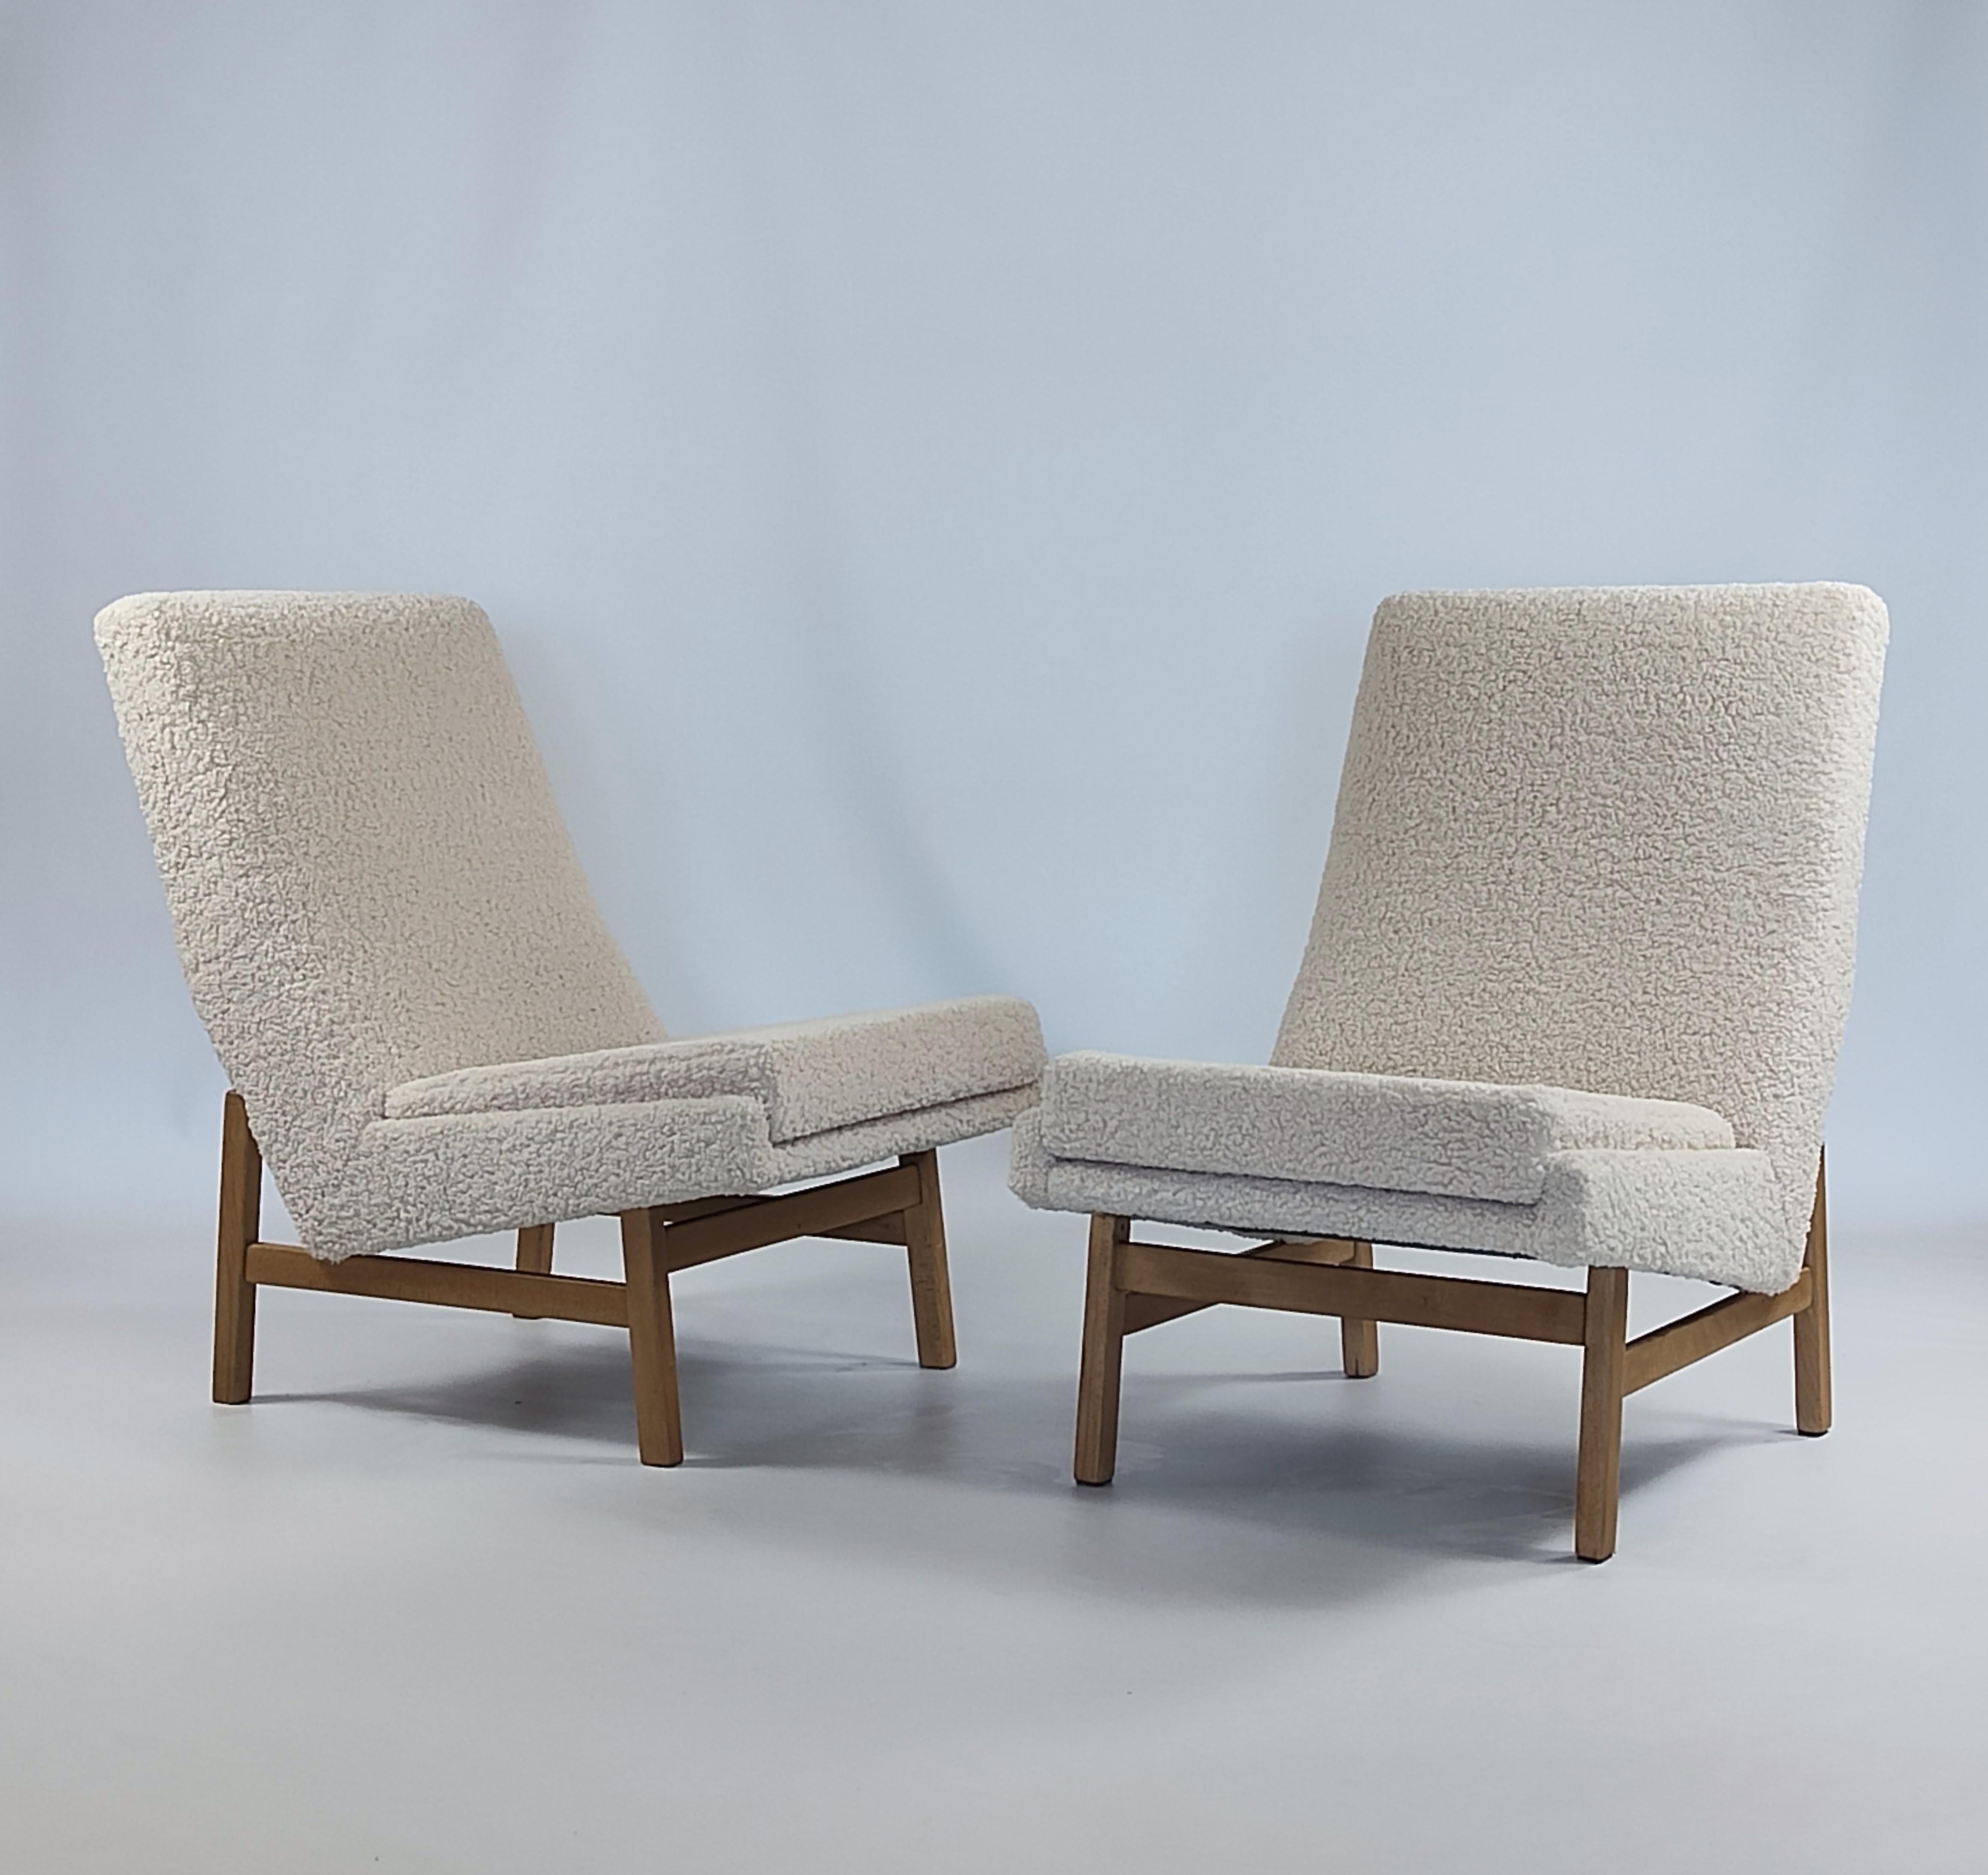 Ash & Cream Boucle Chairs by Guariche, Mortier, Motte for ARP, France, 1955 In Good Condition For Sale In New York, NY